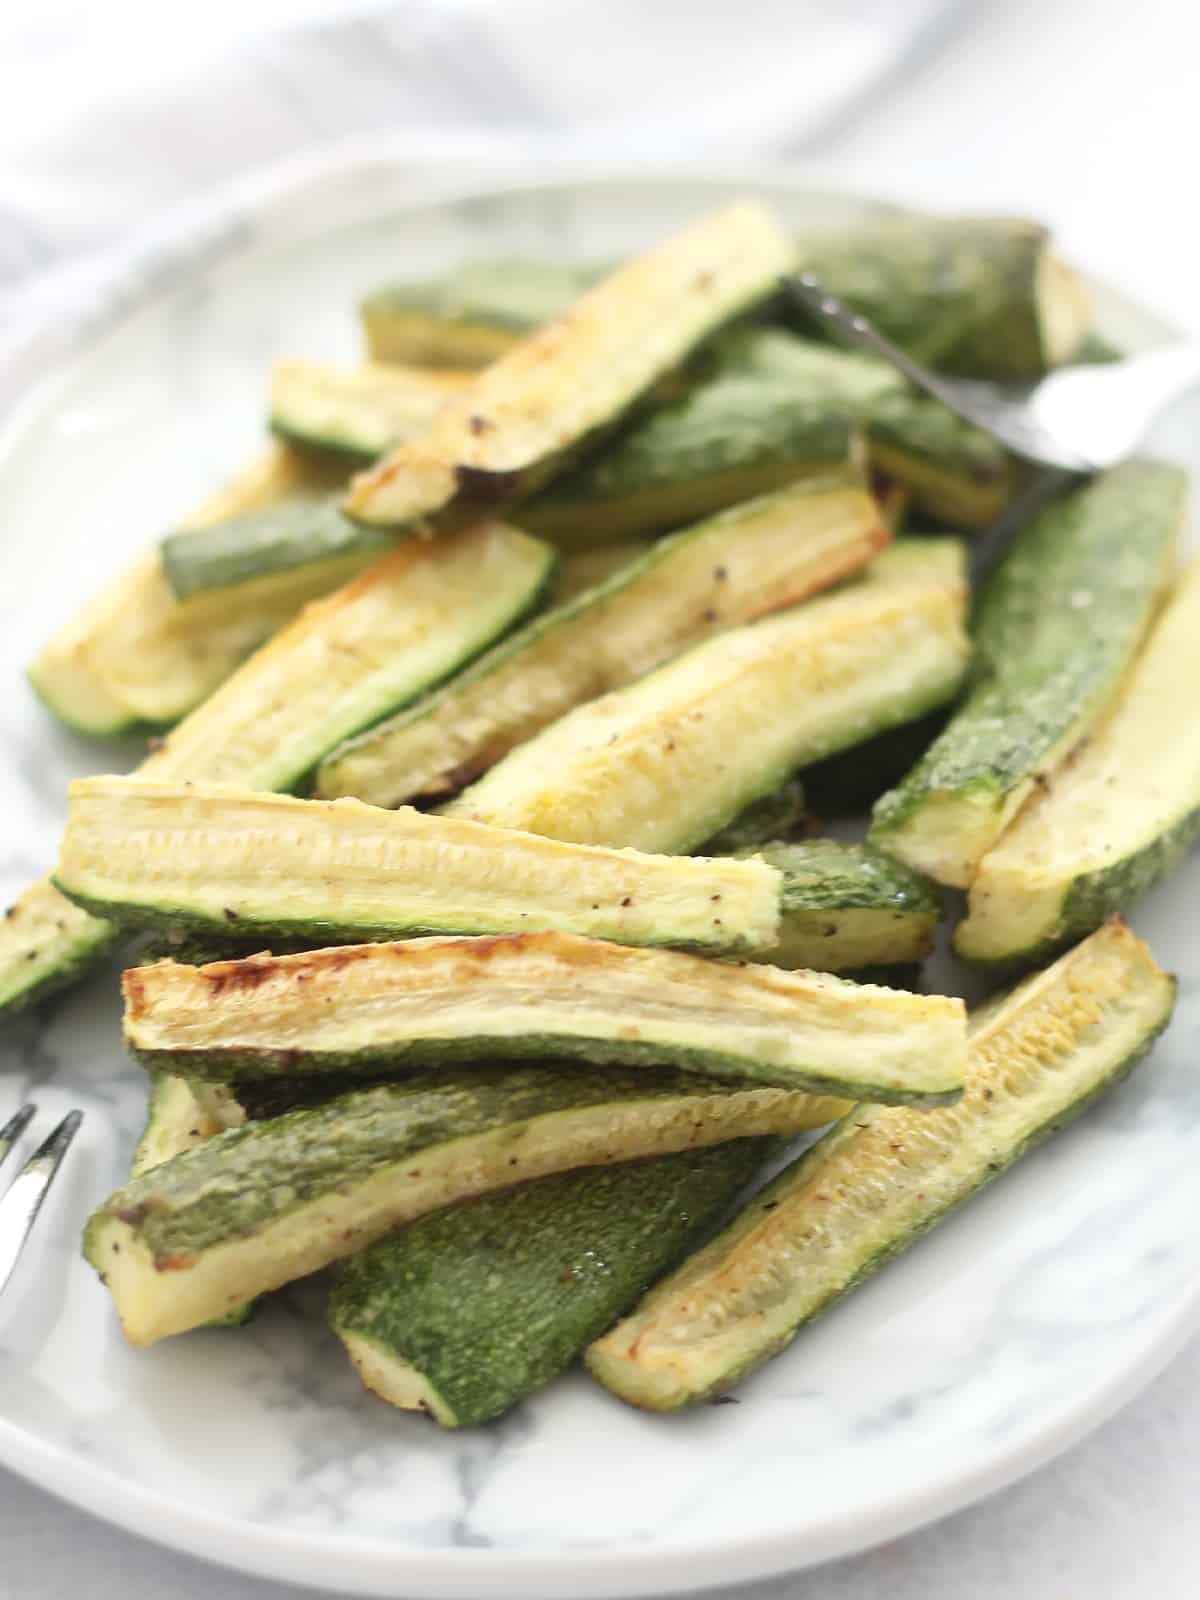 Roasted zucchini spears served on a plate.